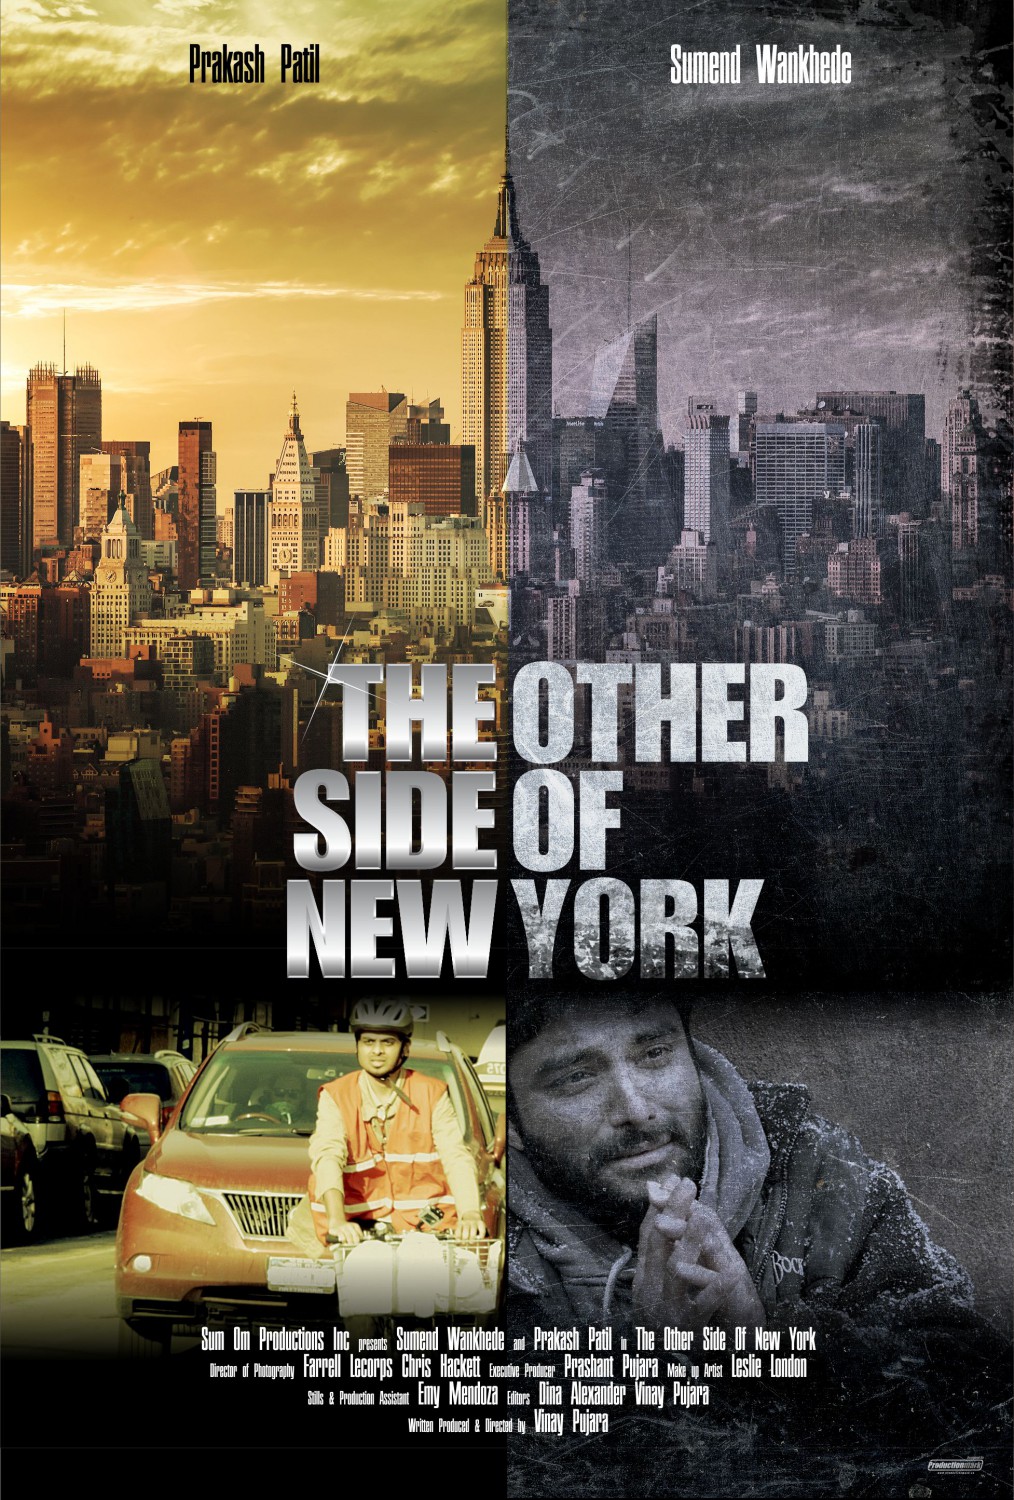 Productionmark-Services-Film-Poster-Design-Short-Film-The-Other-Side-Of-New-York